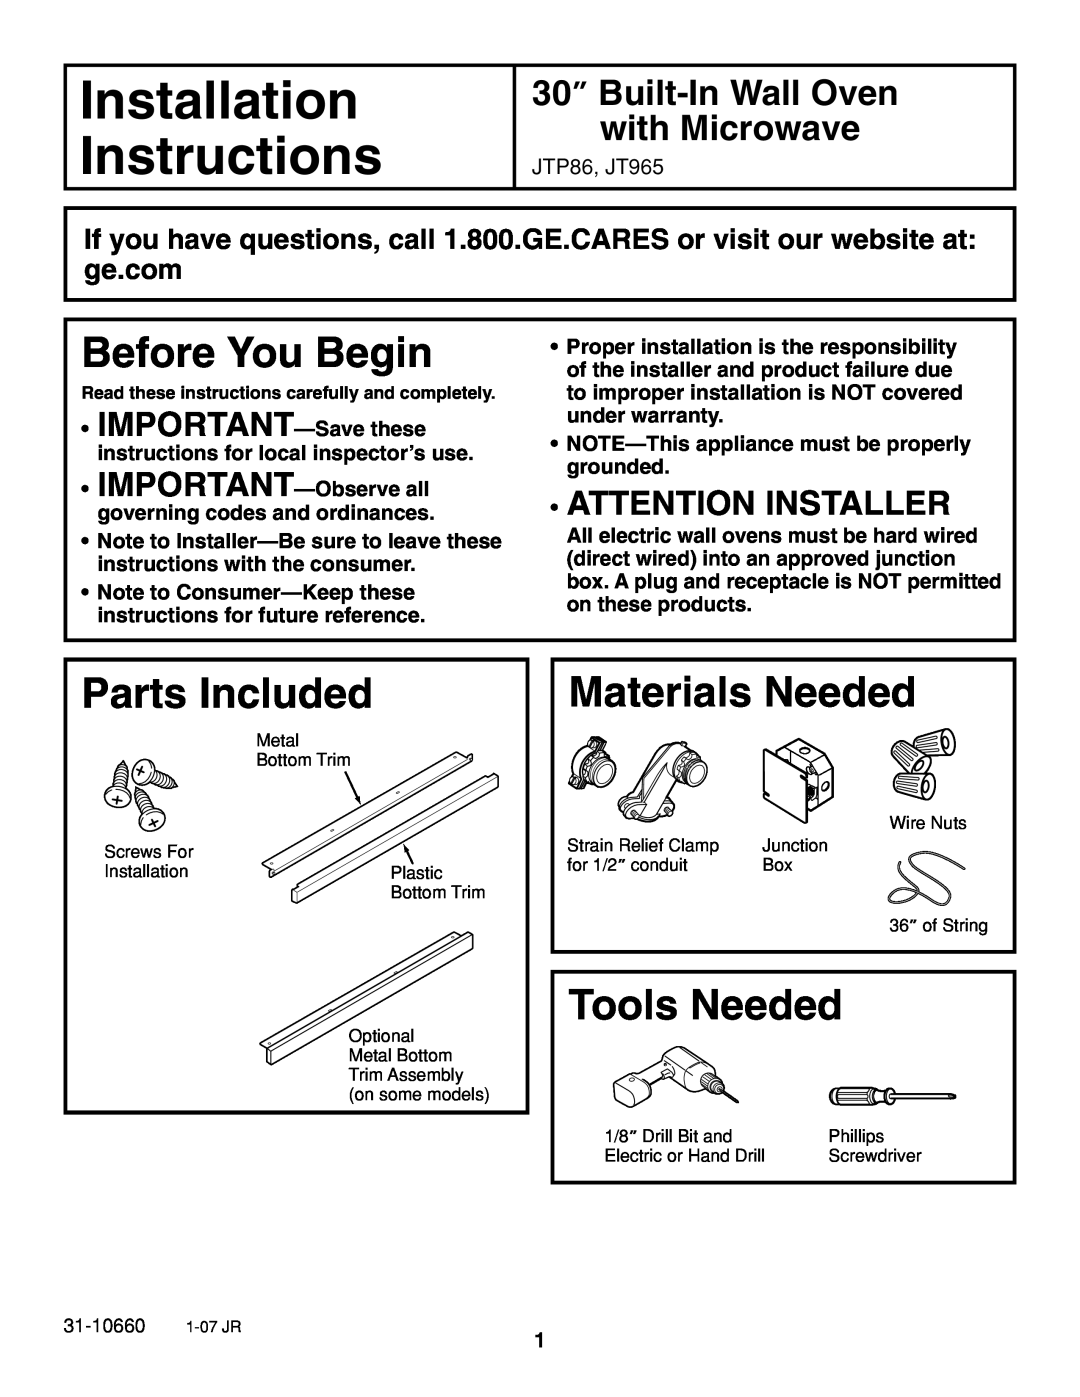 GE JTP86 installation instructions Installation, Instructions, Before You Begin, Parts Included, Materials Needed 